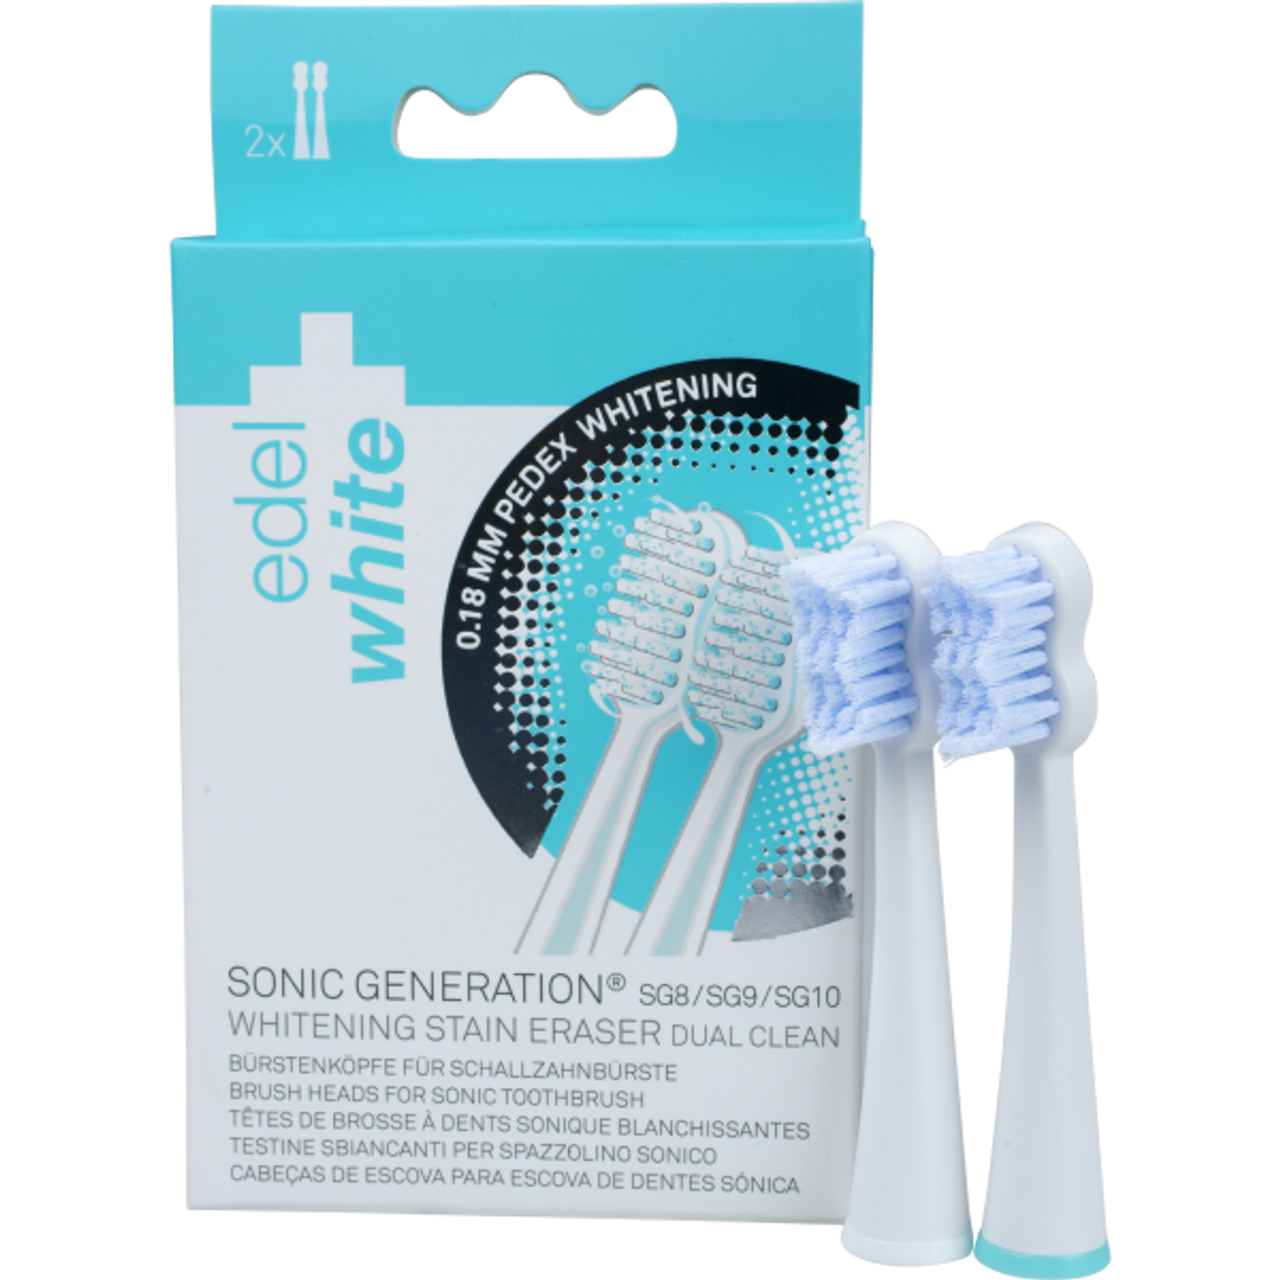 Edel+White-SG8 Sonic Generation 8 Sonic Whitening Stain Eraser Replacement  Brush Heads - 2-Pack (E+W SG2W- Sonic Whitening Stain Eraser)